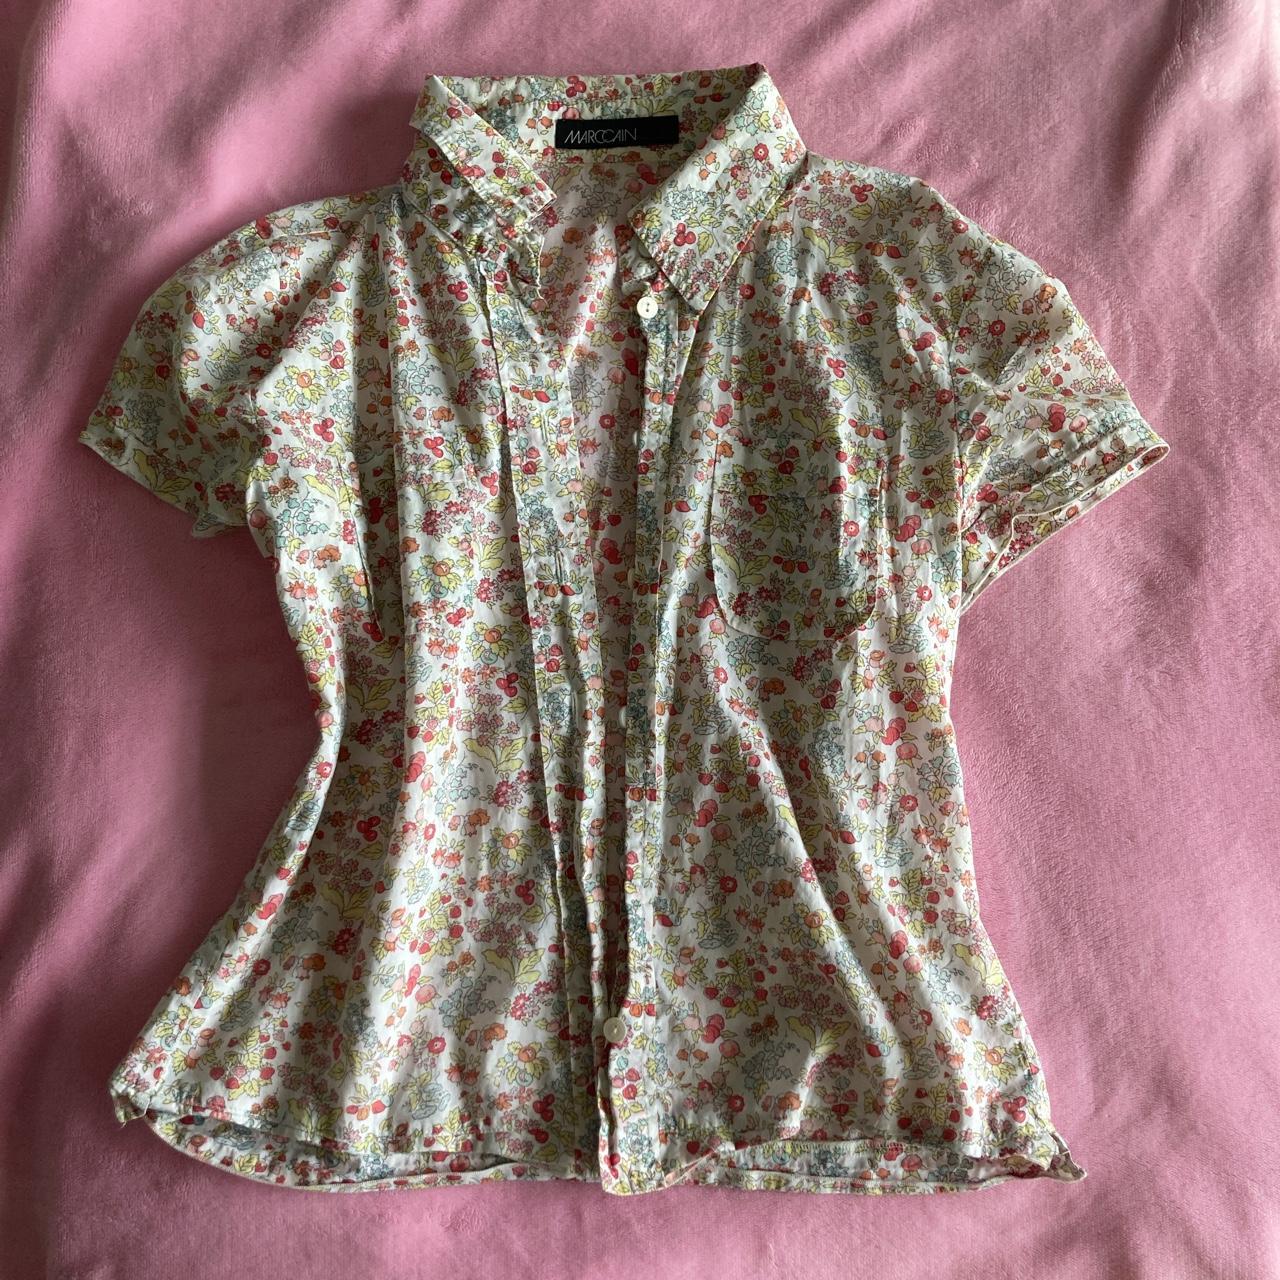 Selling this amazing vintage girly fruity shirt ... - Depop